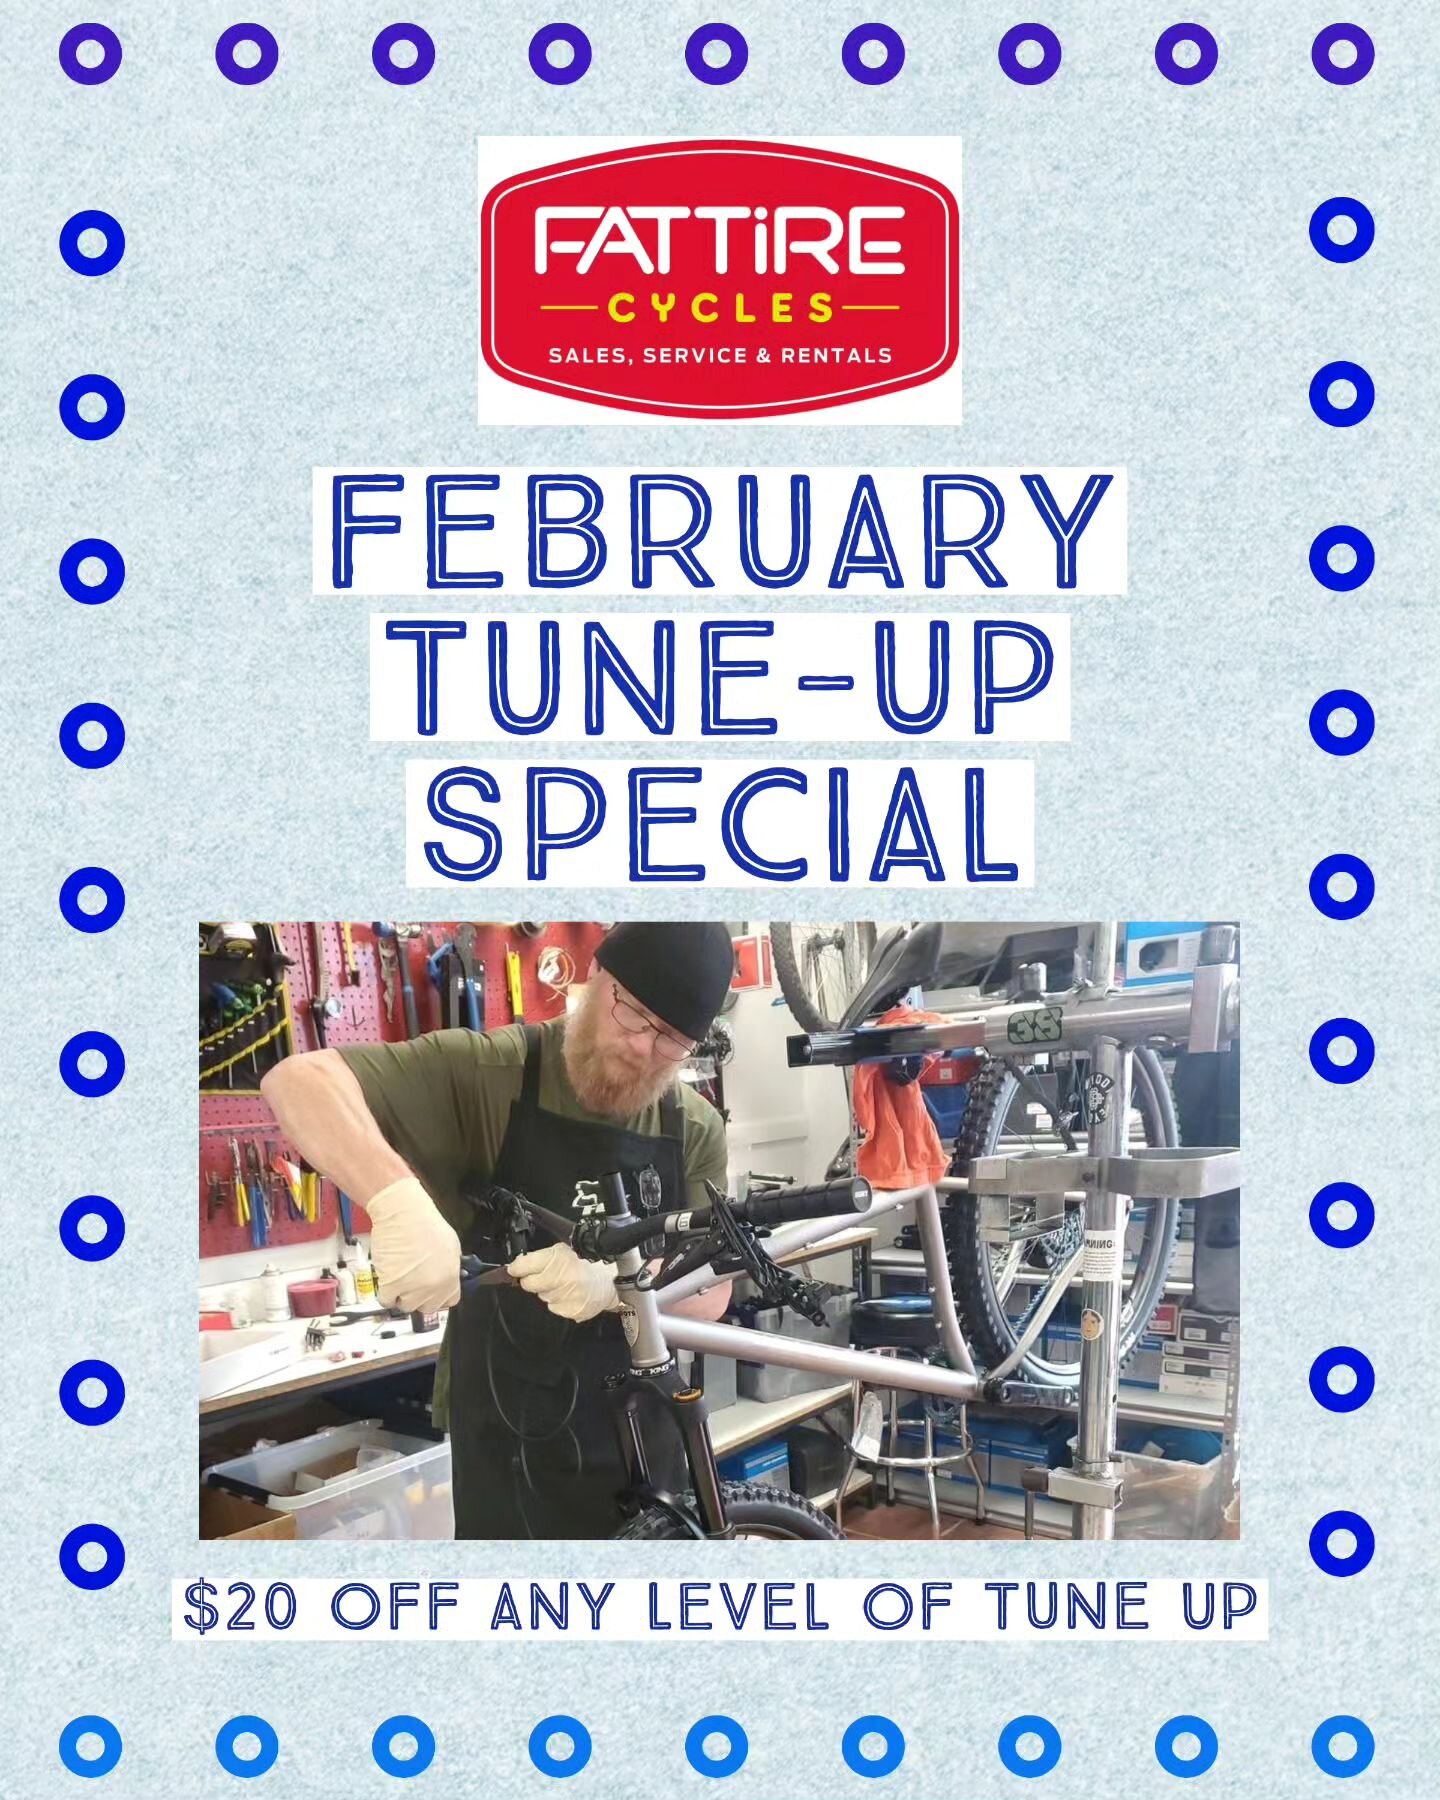 Get your bike ready to roll into spring! 

Take advantage of our $20 OFF Tune-Up Special and quick turnaround times for the entire month of February!

Bring your bike into either Fat Tire Cycles location for a free estimate today! 

#supportlocal #lo